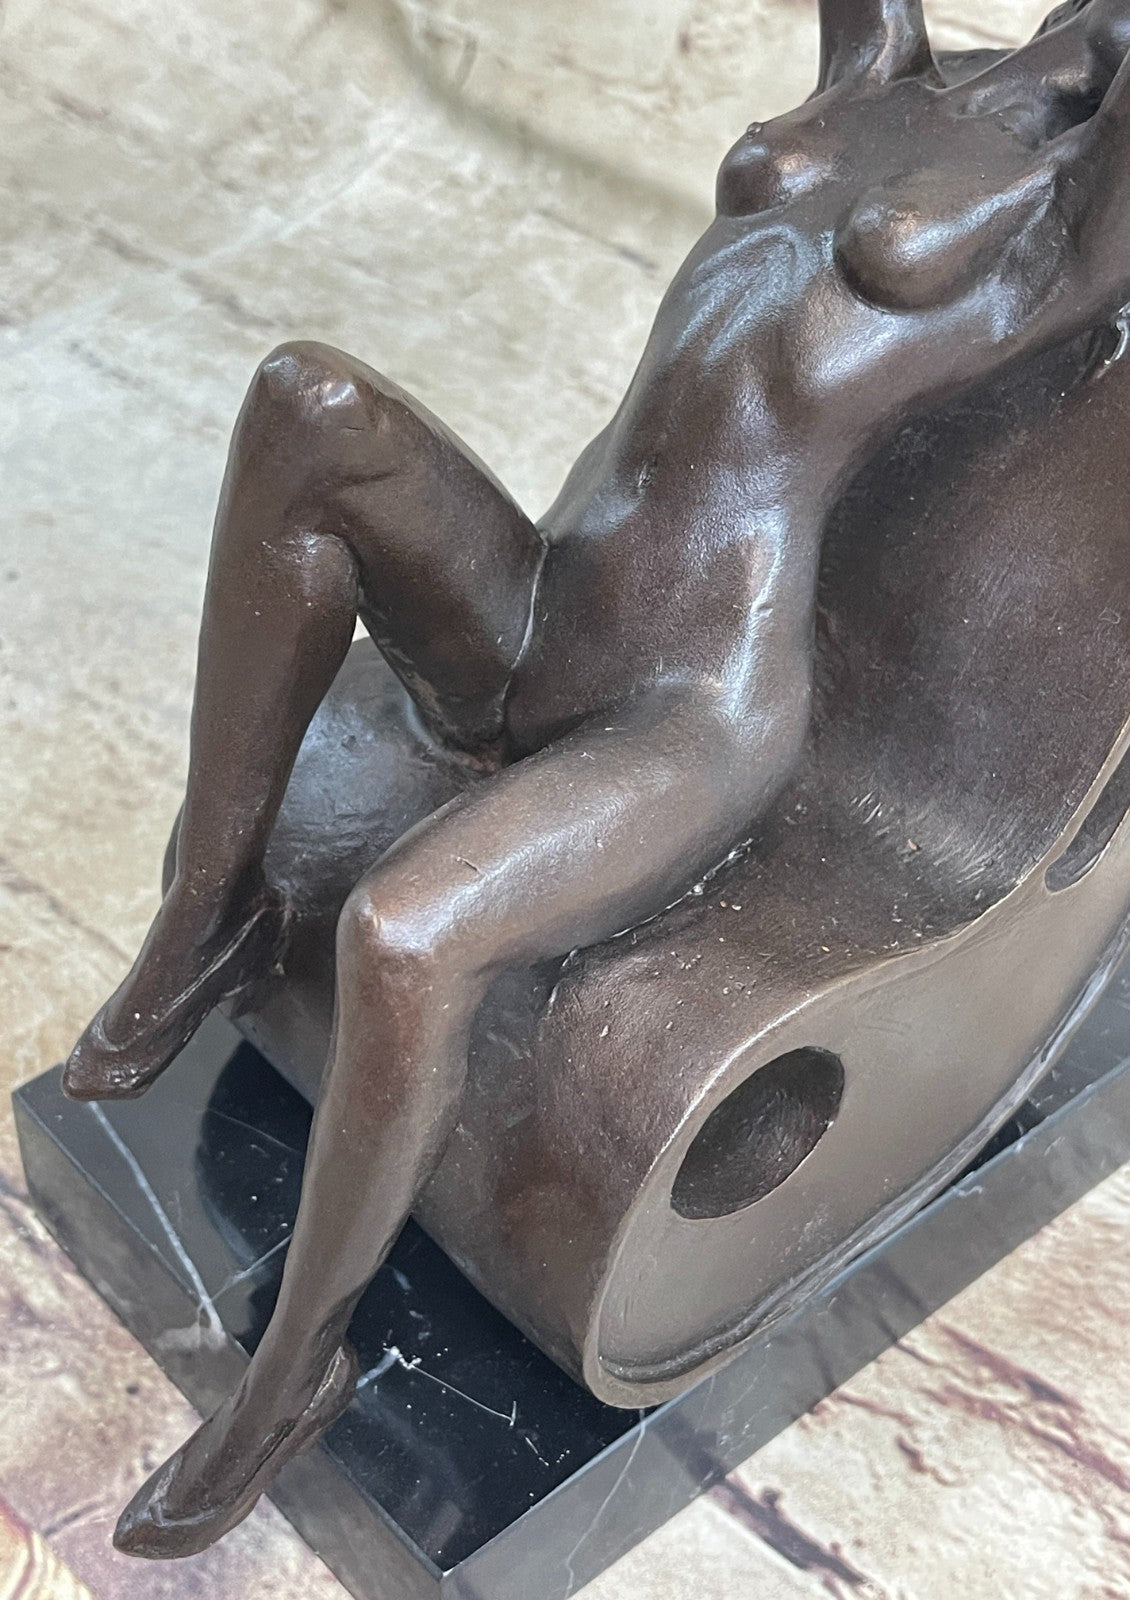 Thumb SIGNED DECO BRONZE SCULPTURE CUBISM NUDE GIRL ABSTRACT MODERN ART STATUE